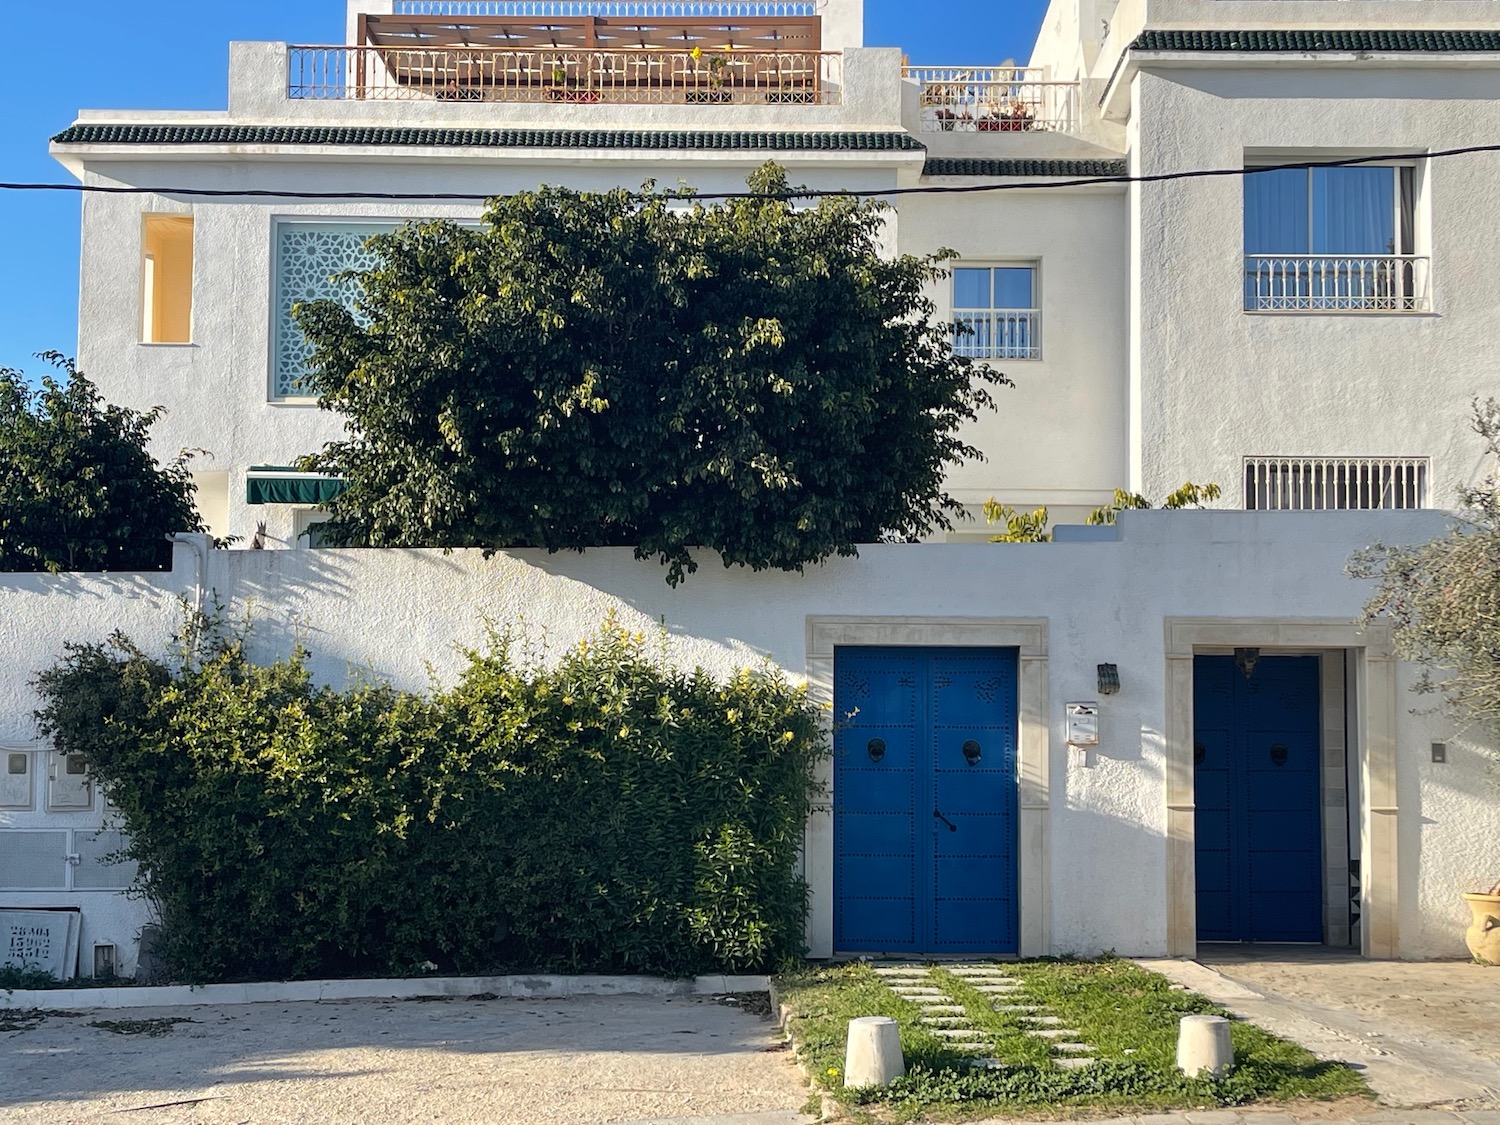 a building with blue doors and a tree